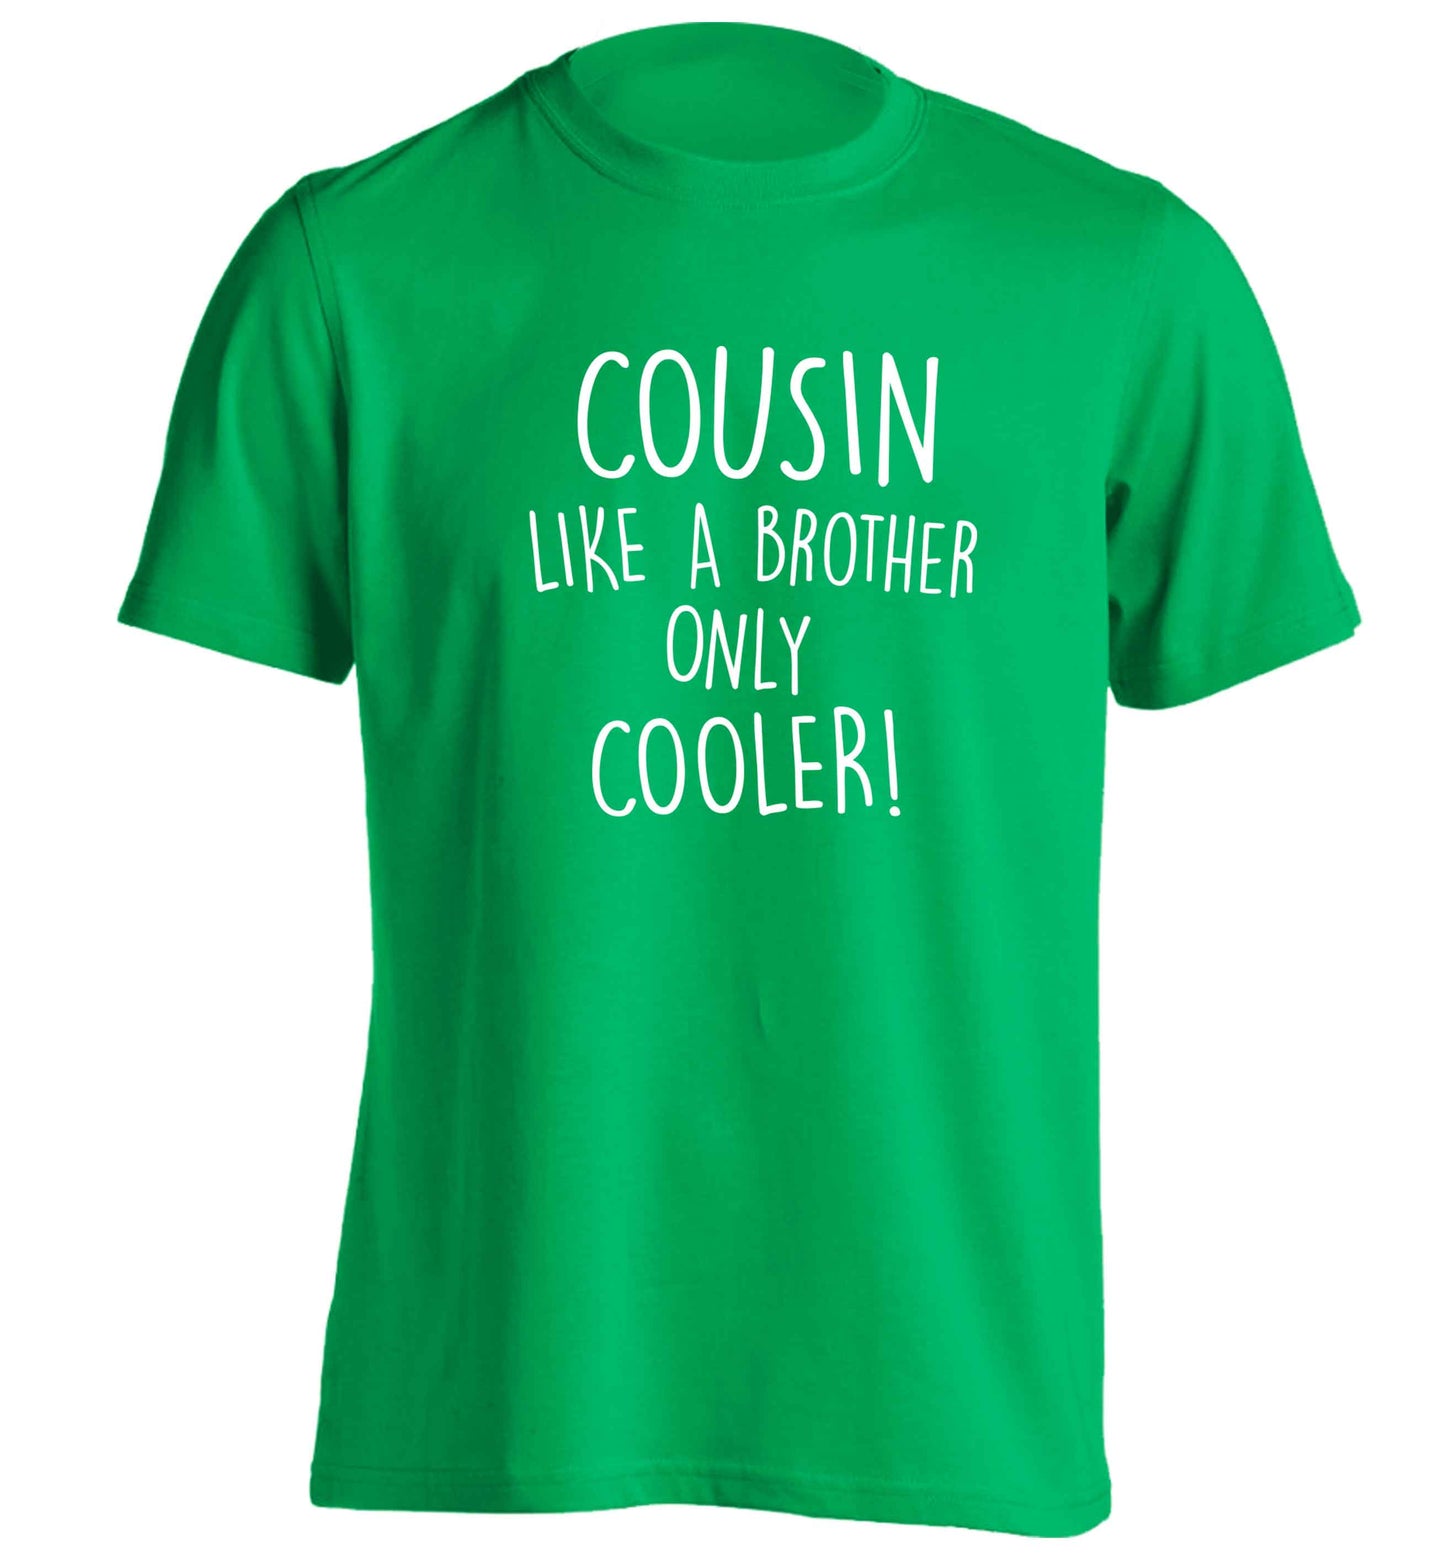 Cousin like a brother only cooler adults unisex green Tshirt 2XL